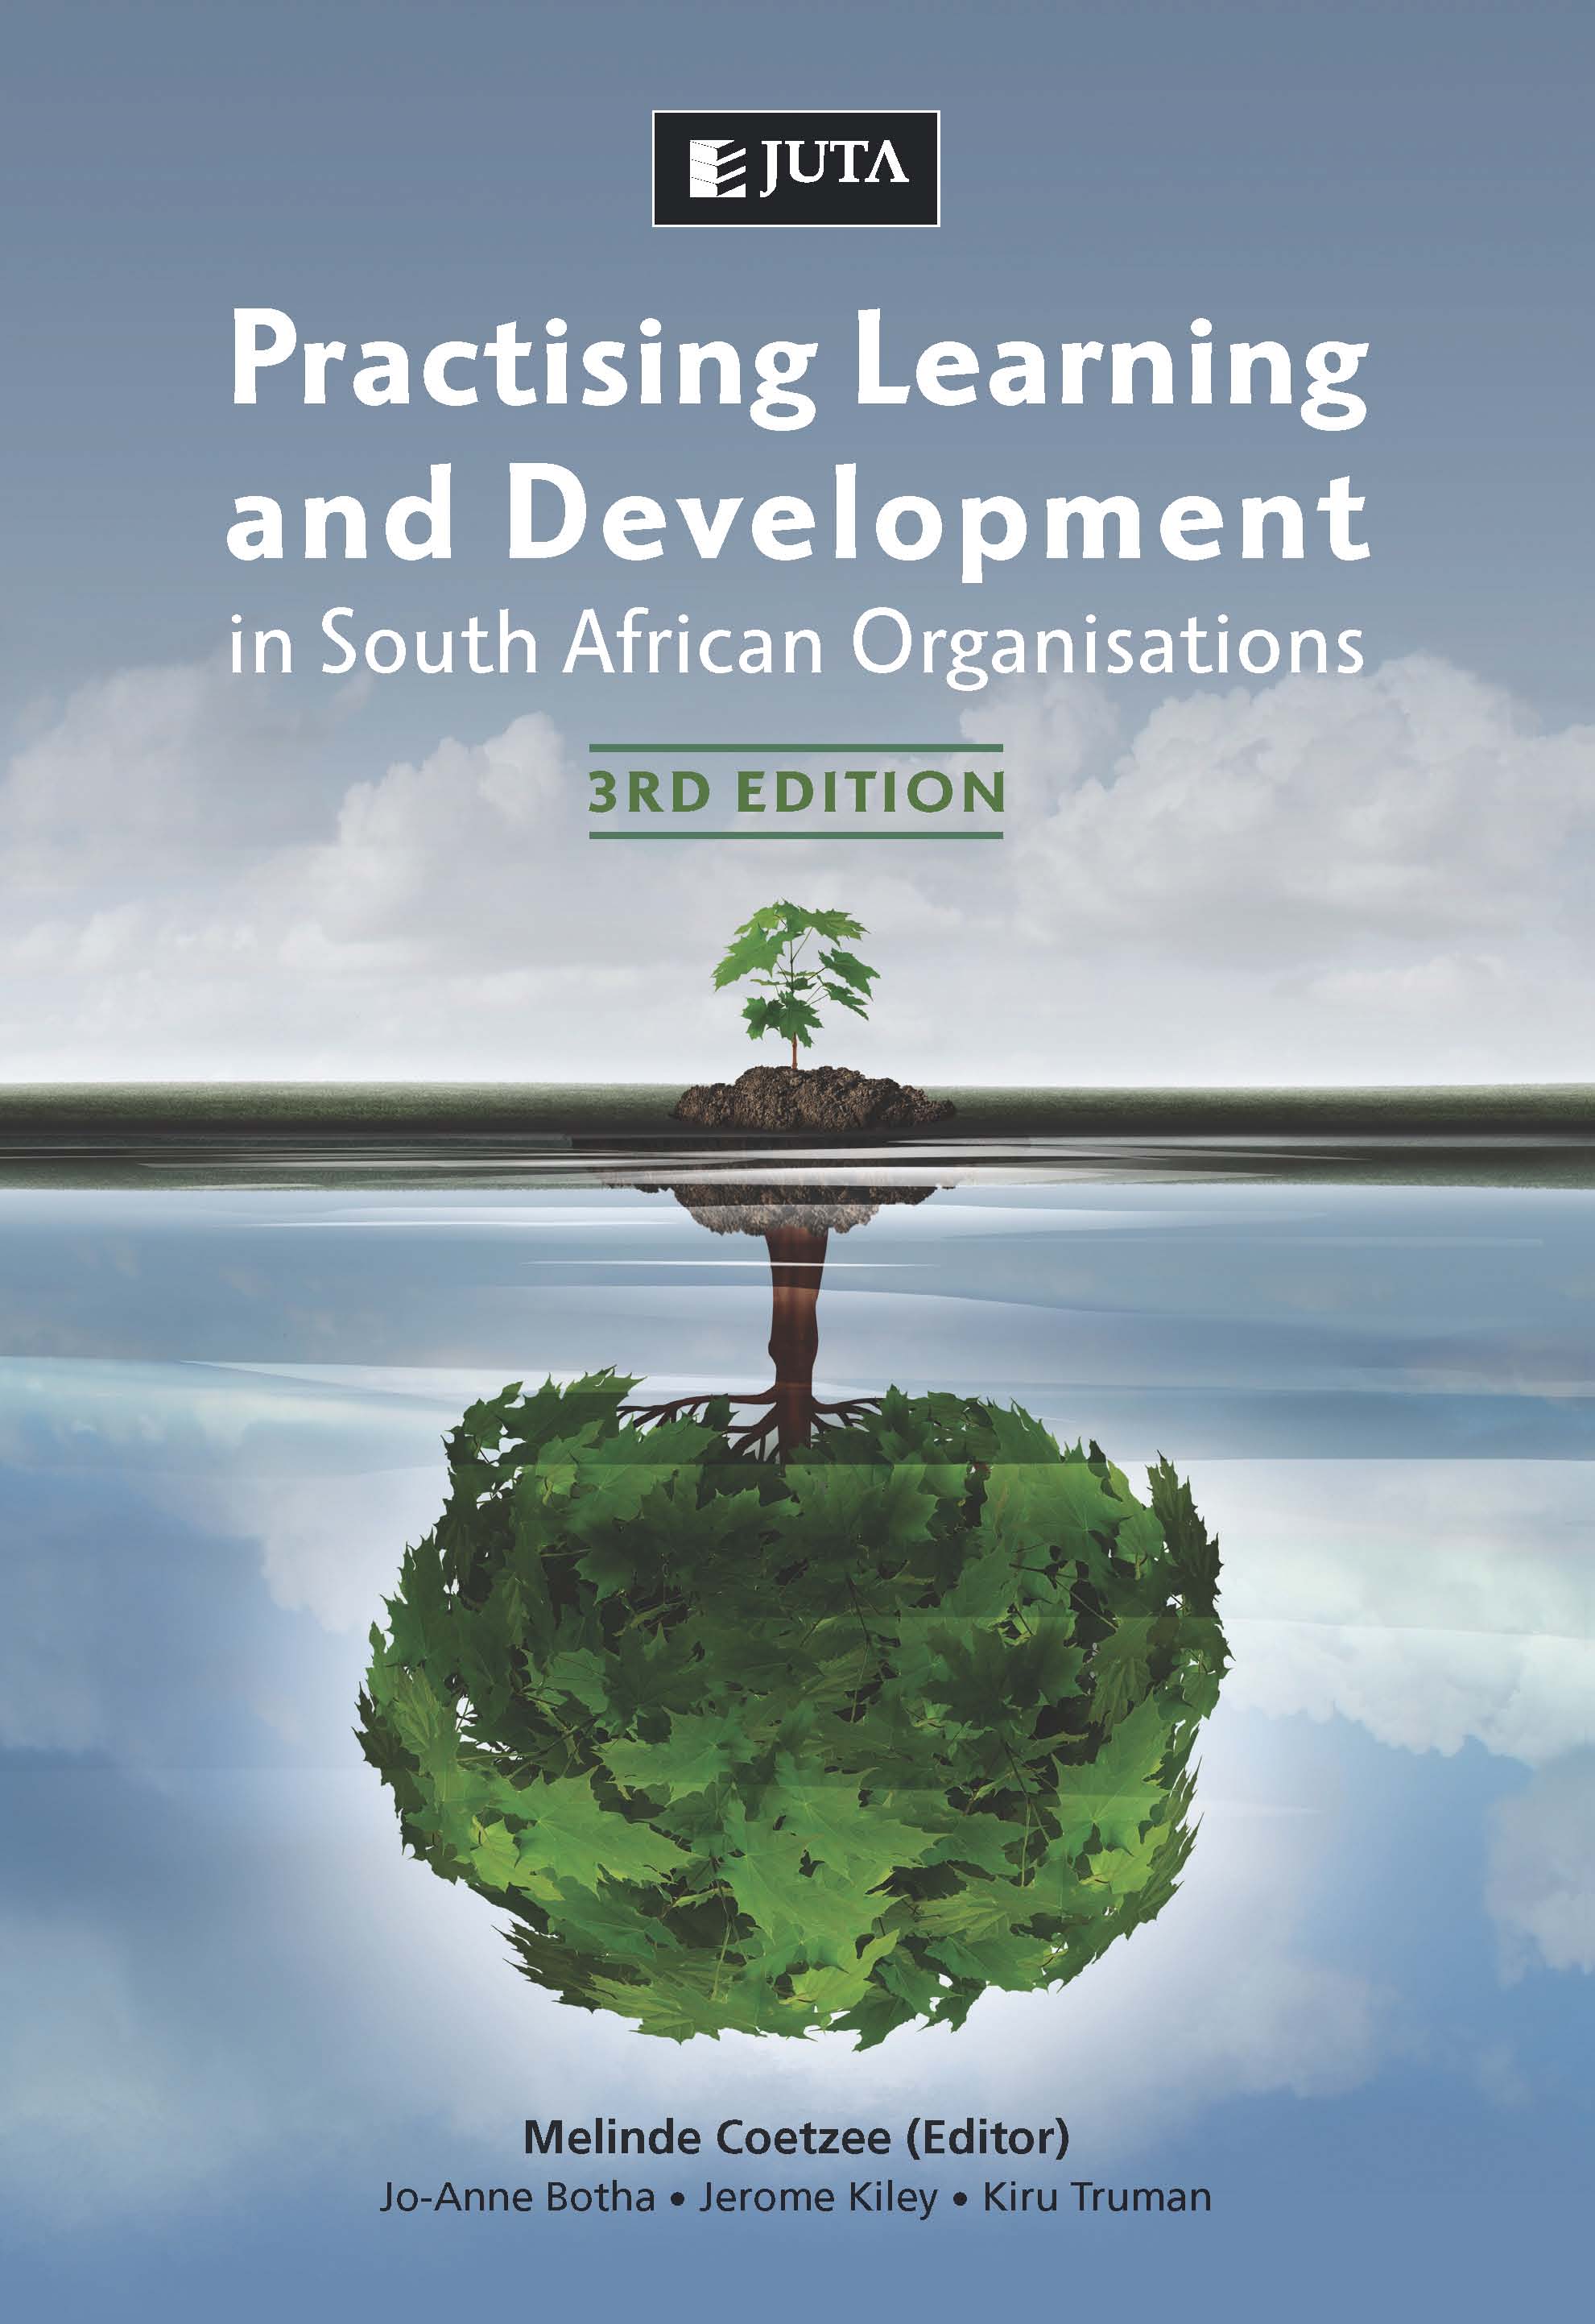 Practising Learning and Development: In South African Organisations